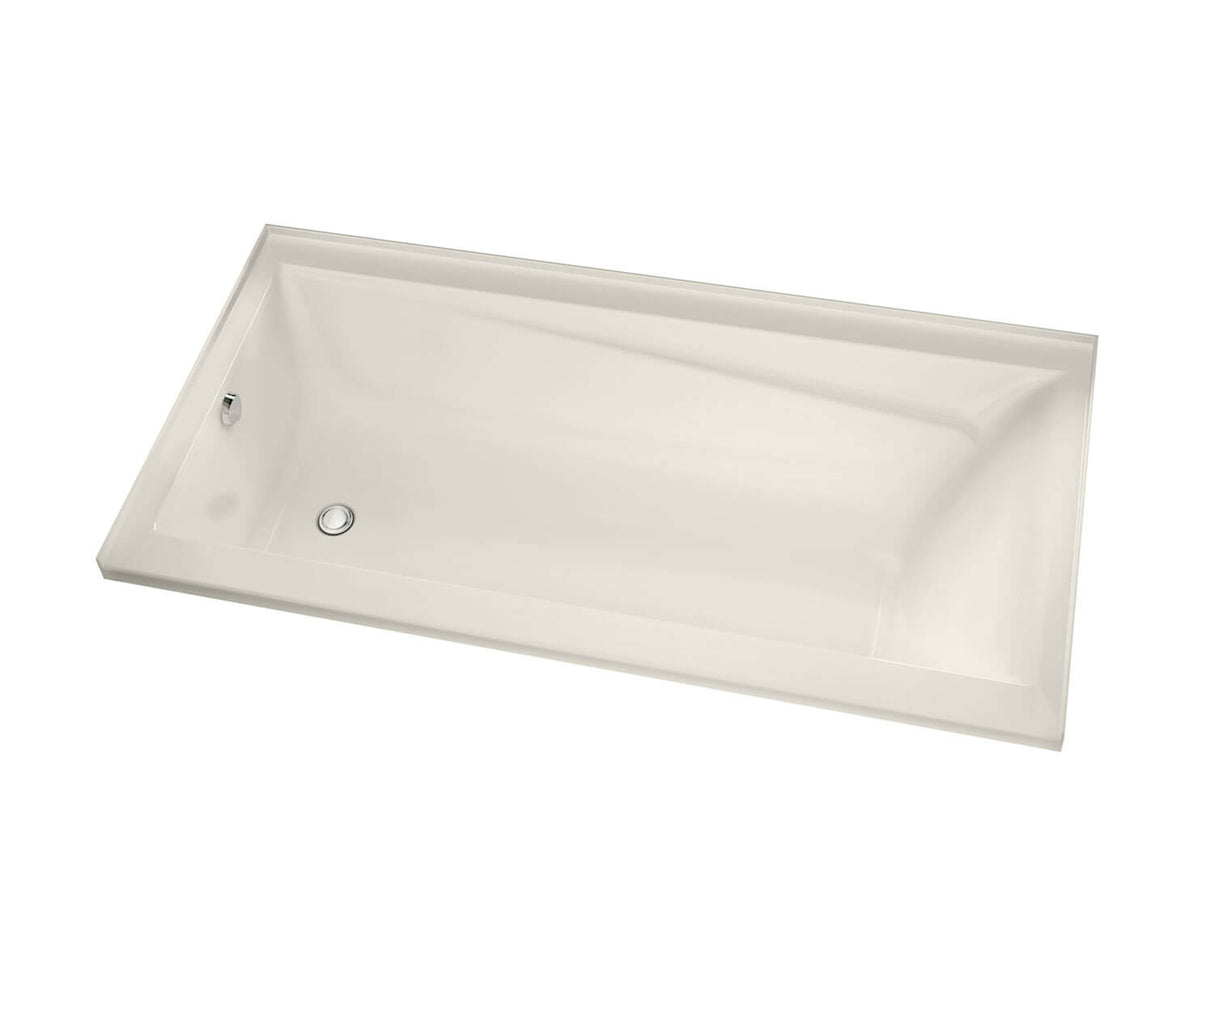 MAAX 106171-R-097-007 Exhibit 6036 IF Acrylic Alcove Right-Hand Drain Combined Whirlpool & Aeroeffect Bathtub in Biscuit